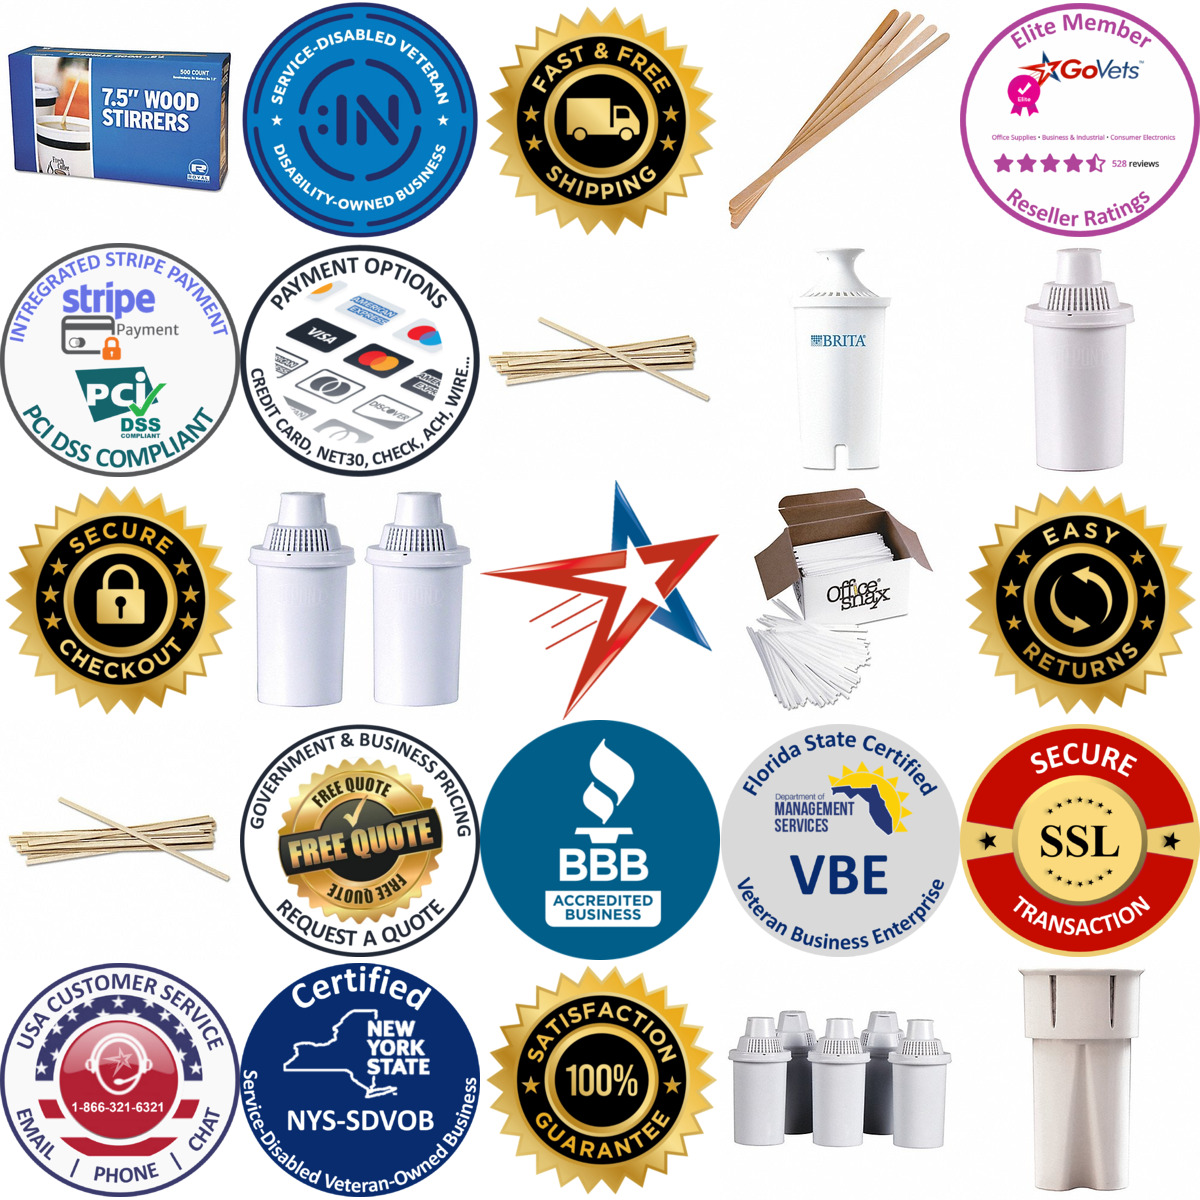 A selection of Beverage Accessories products on GoVets